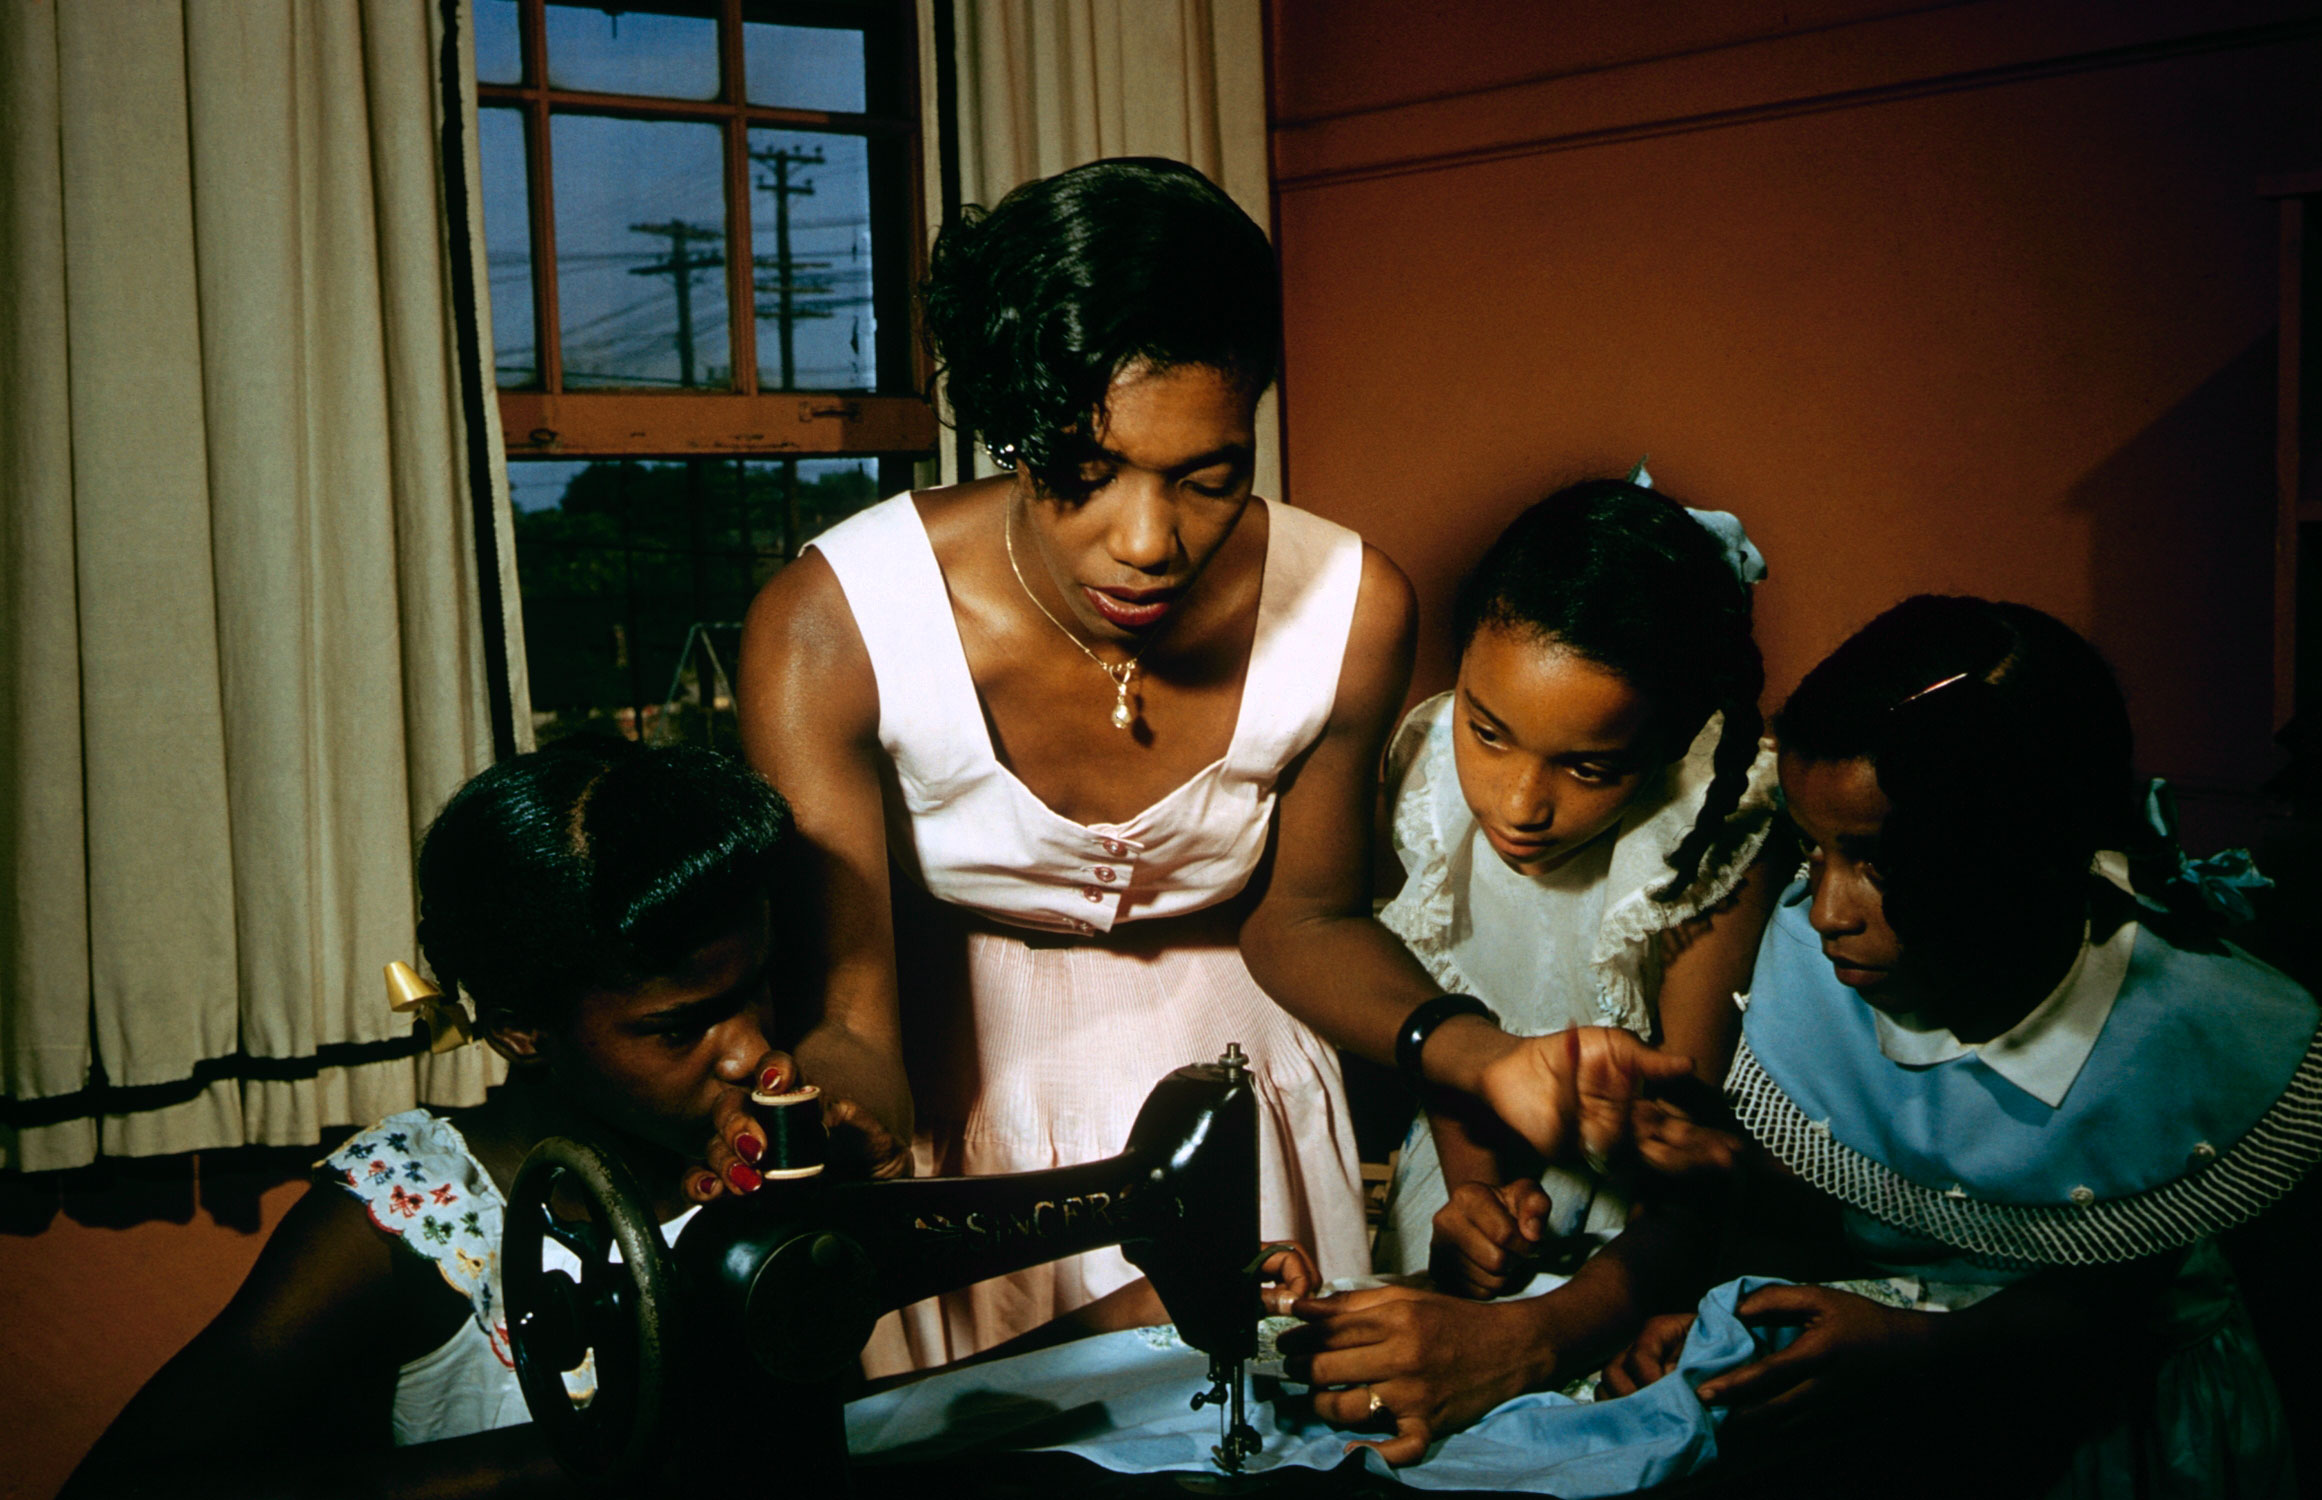 Young girls listen attentively in a sewing class, Greenville, S. Carolina, 1956.